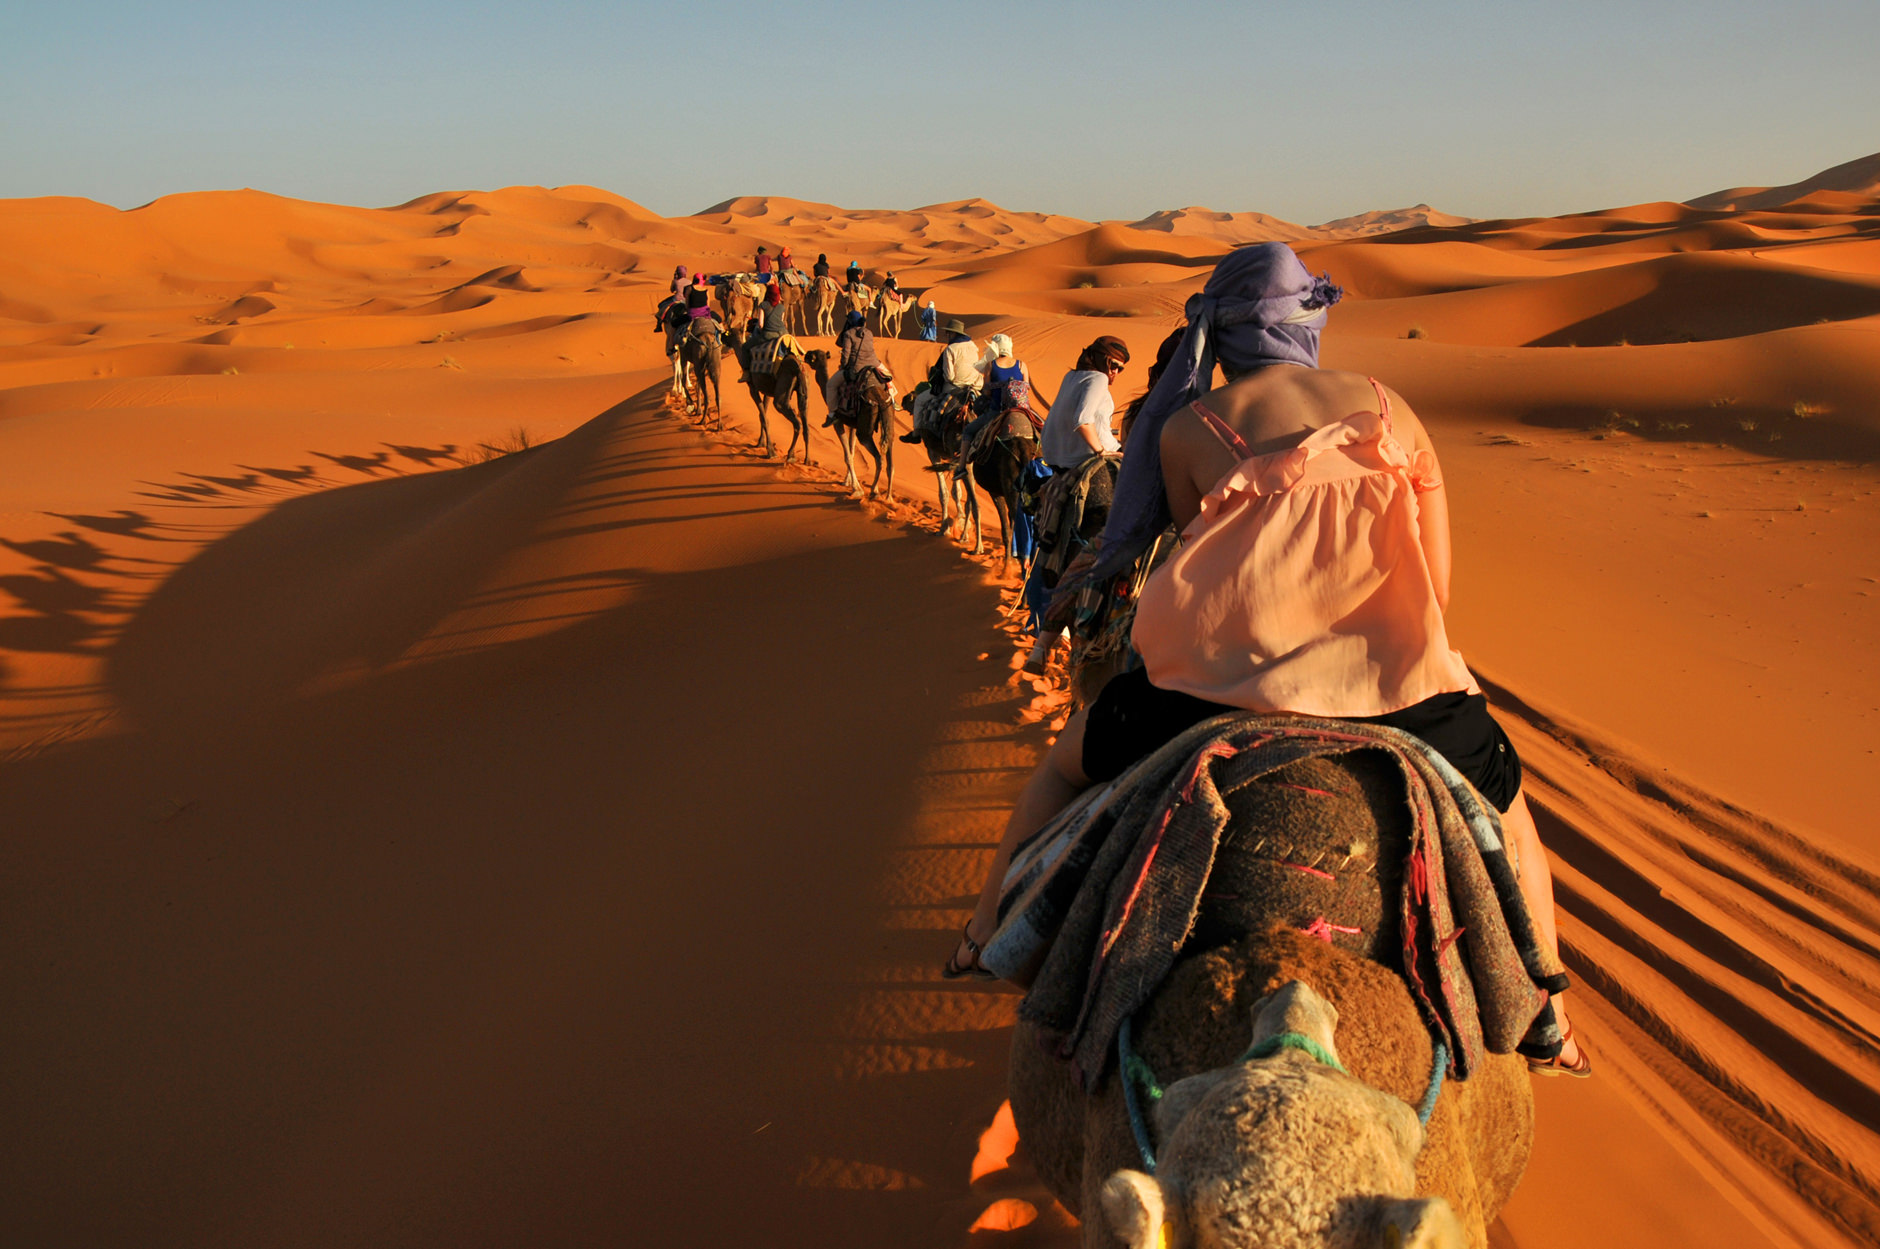 People on a camel safari in the desert.